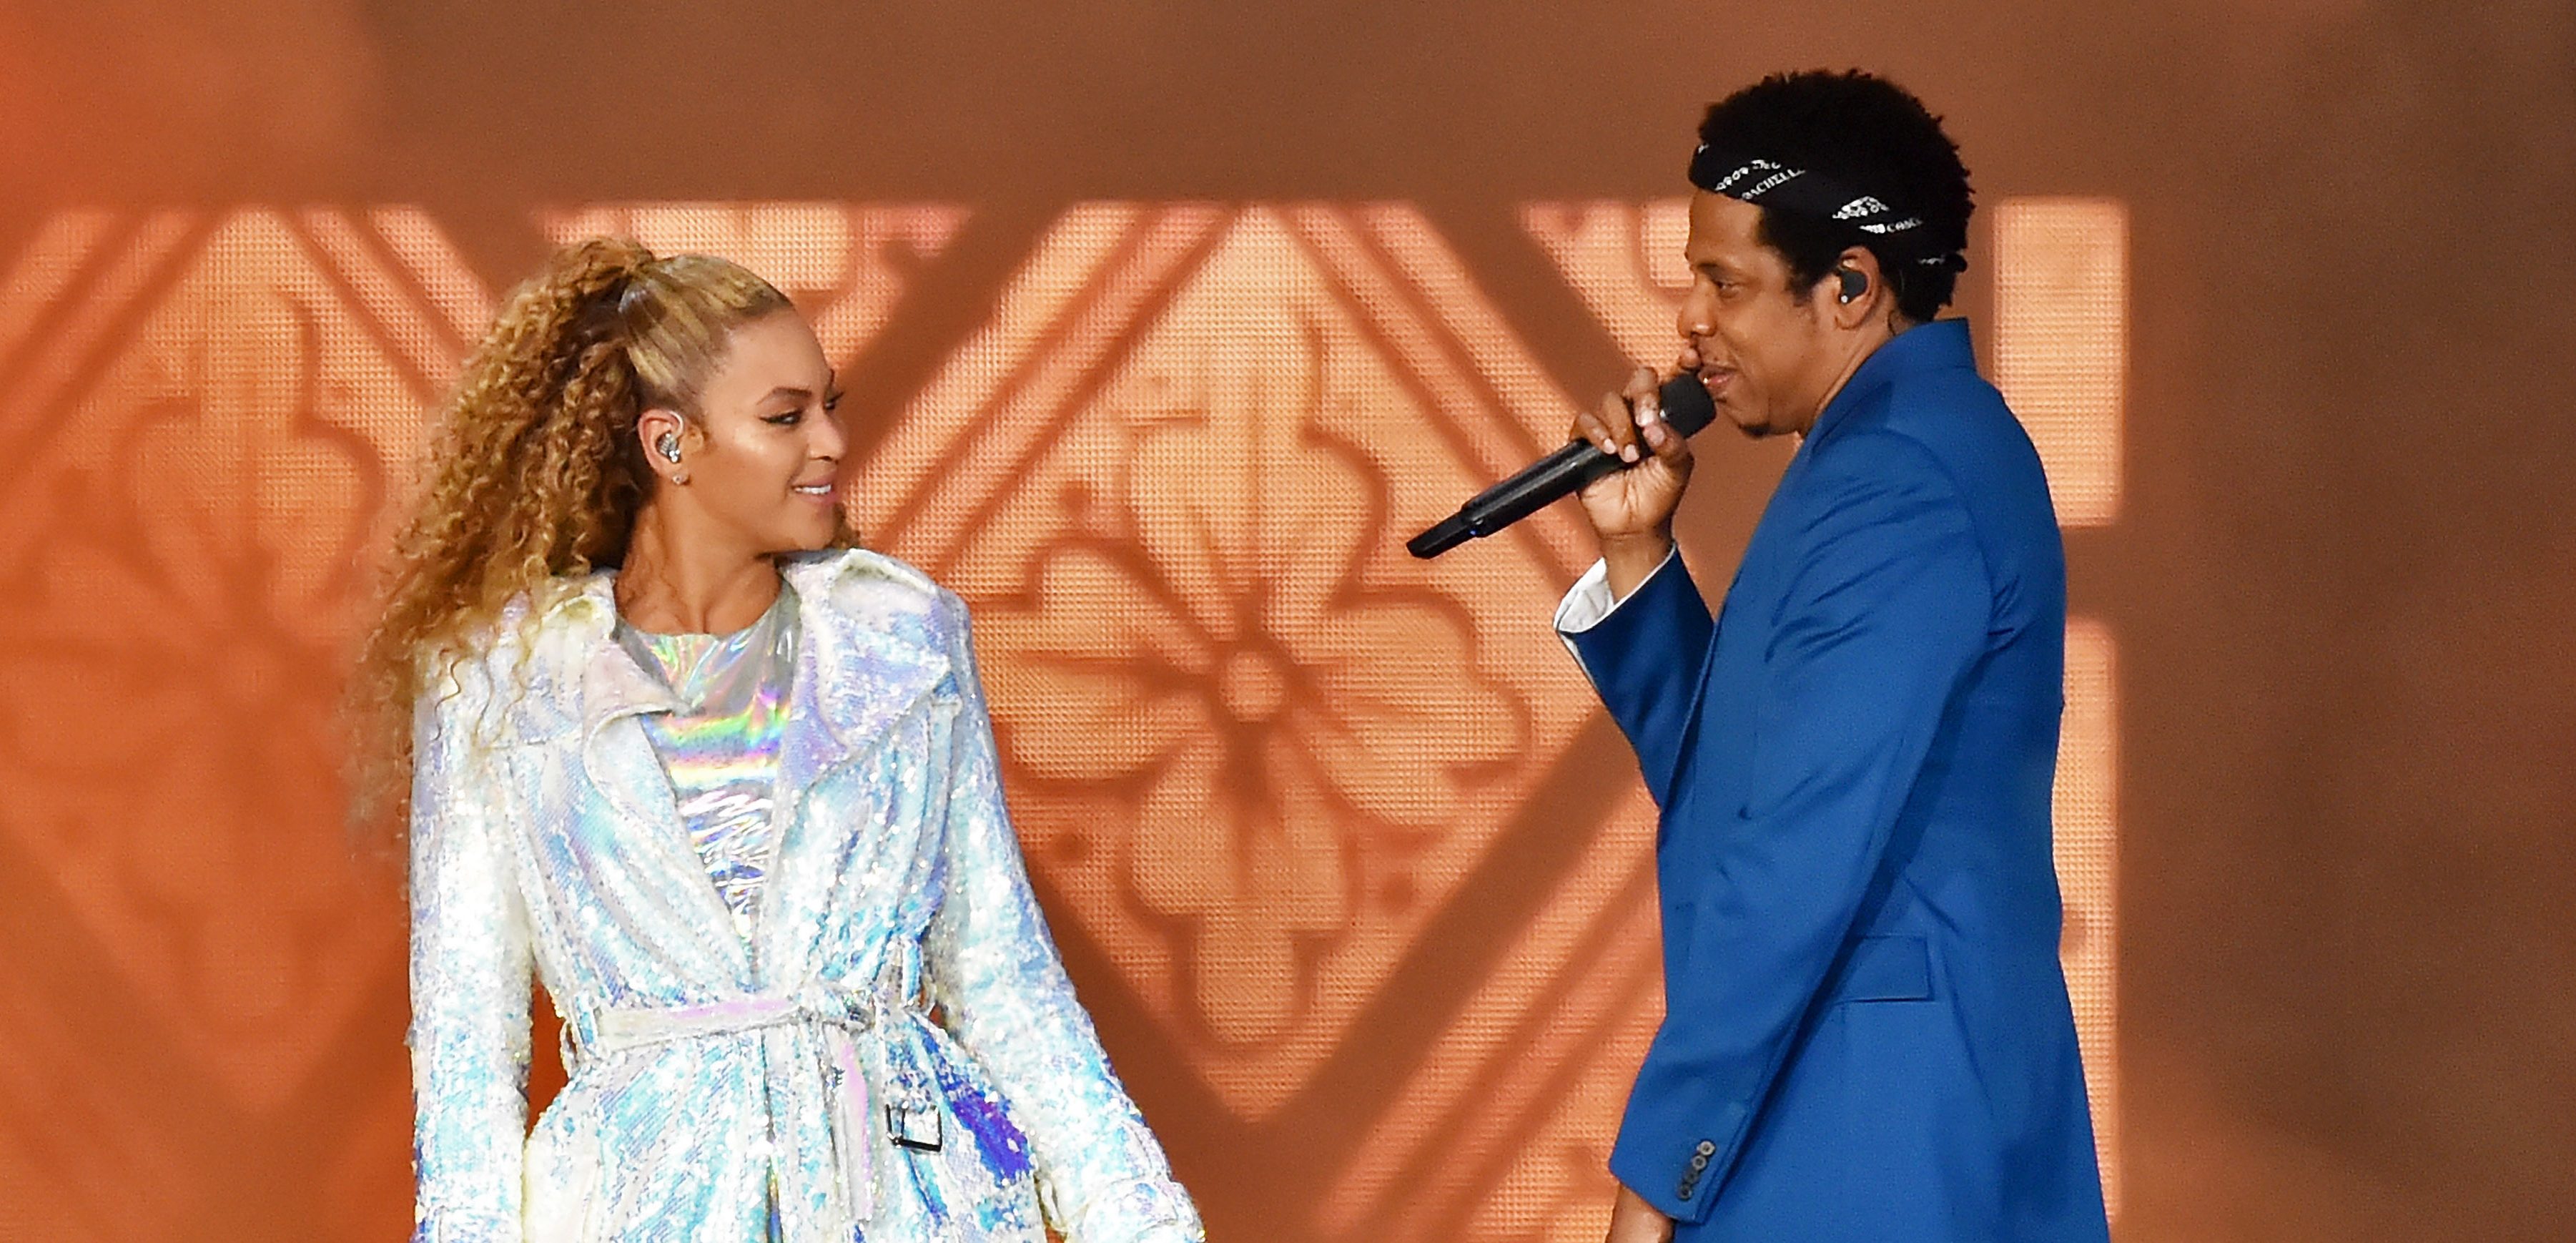 Beyonce Knowles and Jay-Z perform on stage during the "On the Run II" tour opener at Principality Stadium on June 6, 2018 in Cardiff, Wales.  (Photo by Kevin Mazur/Getty Images For Parkwood Entertainment)